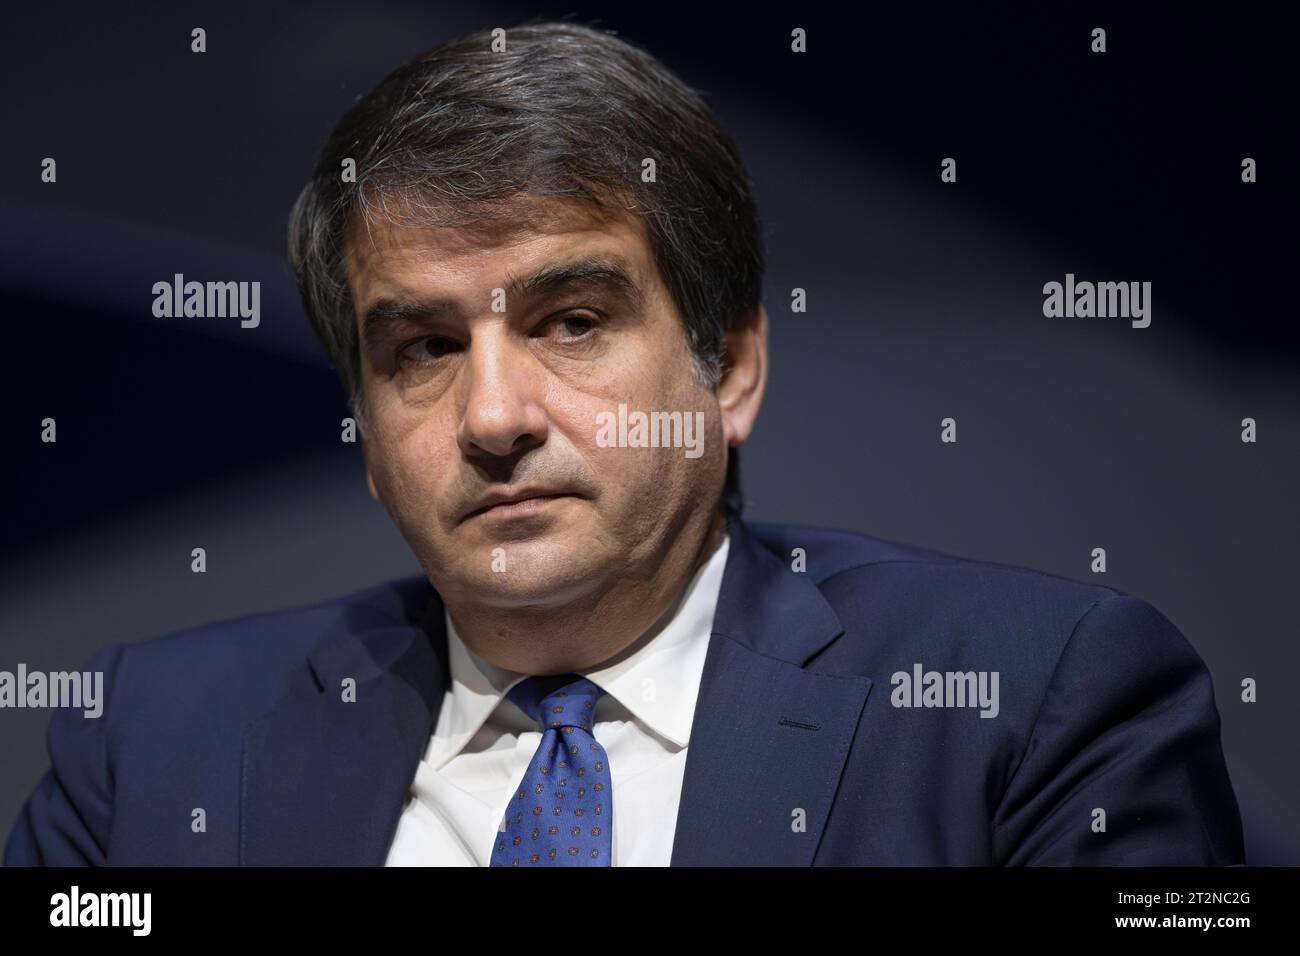 Congress of accountants Raffaele Fitto, Italian minister of European affairs, looks on during the national congress of accountants and accounting experts Lavoriamo insieme per il nostro futuro Let s work together for our future. Turin Italy Copyright: xNicolòxCampox Credit: Imago/Alamy Live News Stock Photo